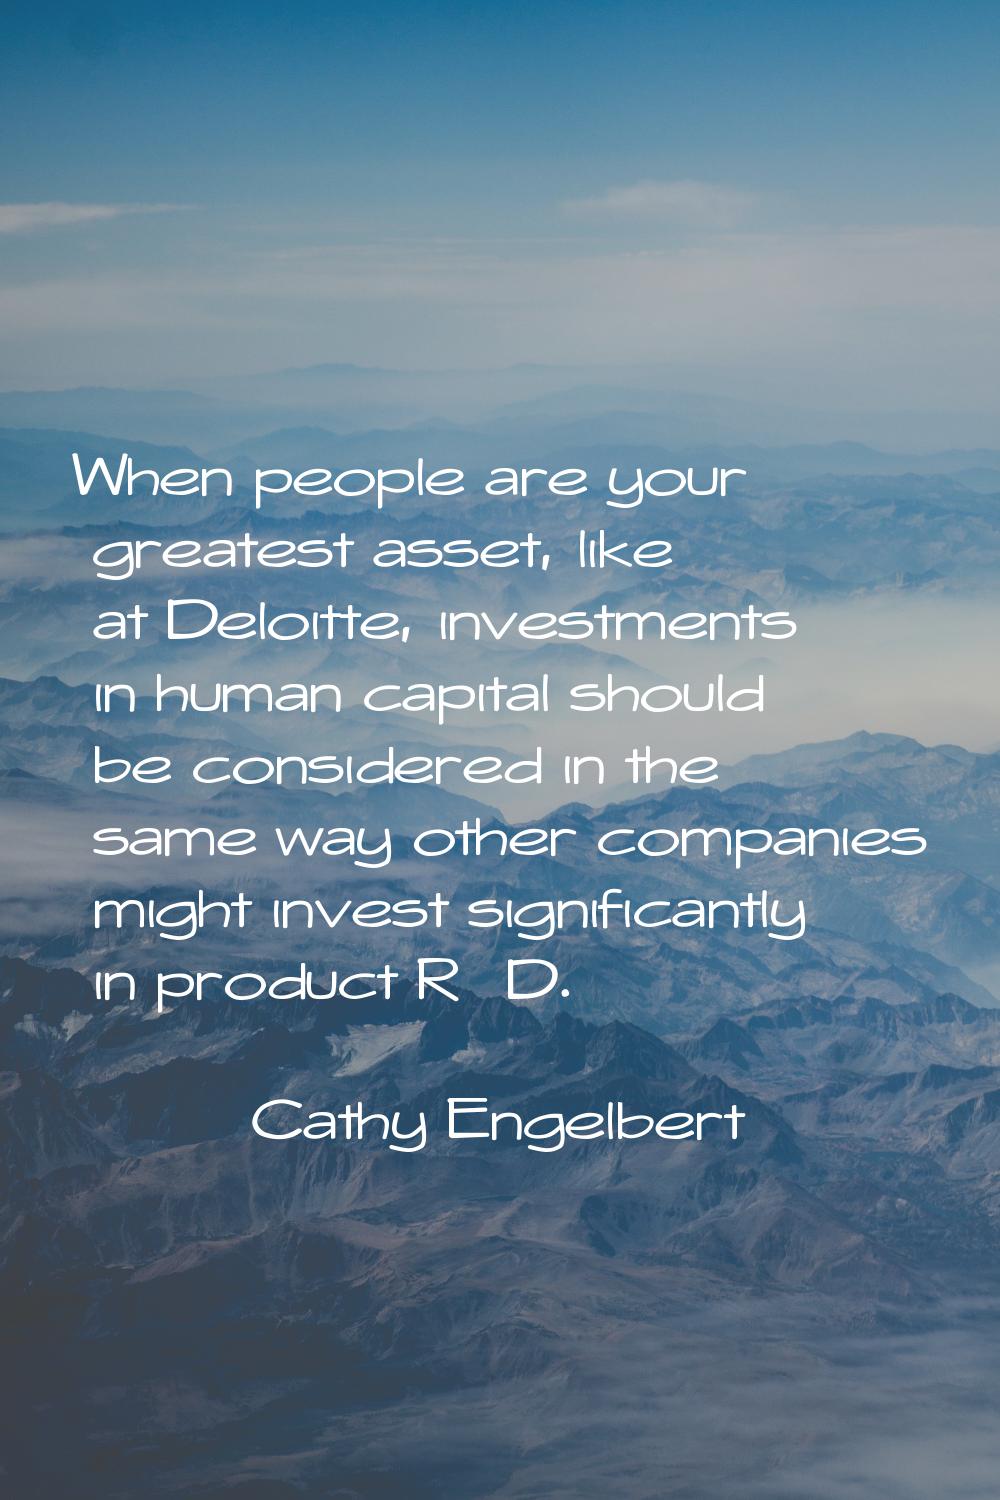 When people are your greatest asset, like at Deloitte, investments in human capital should be consi